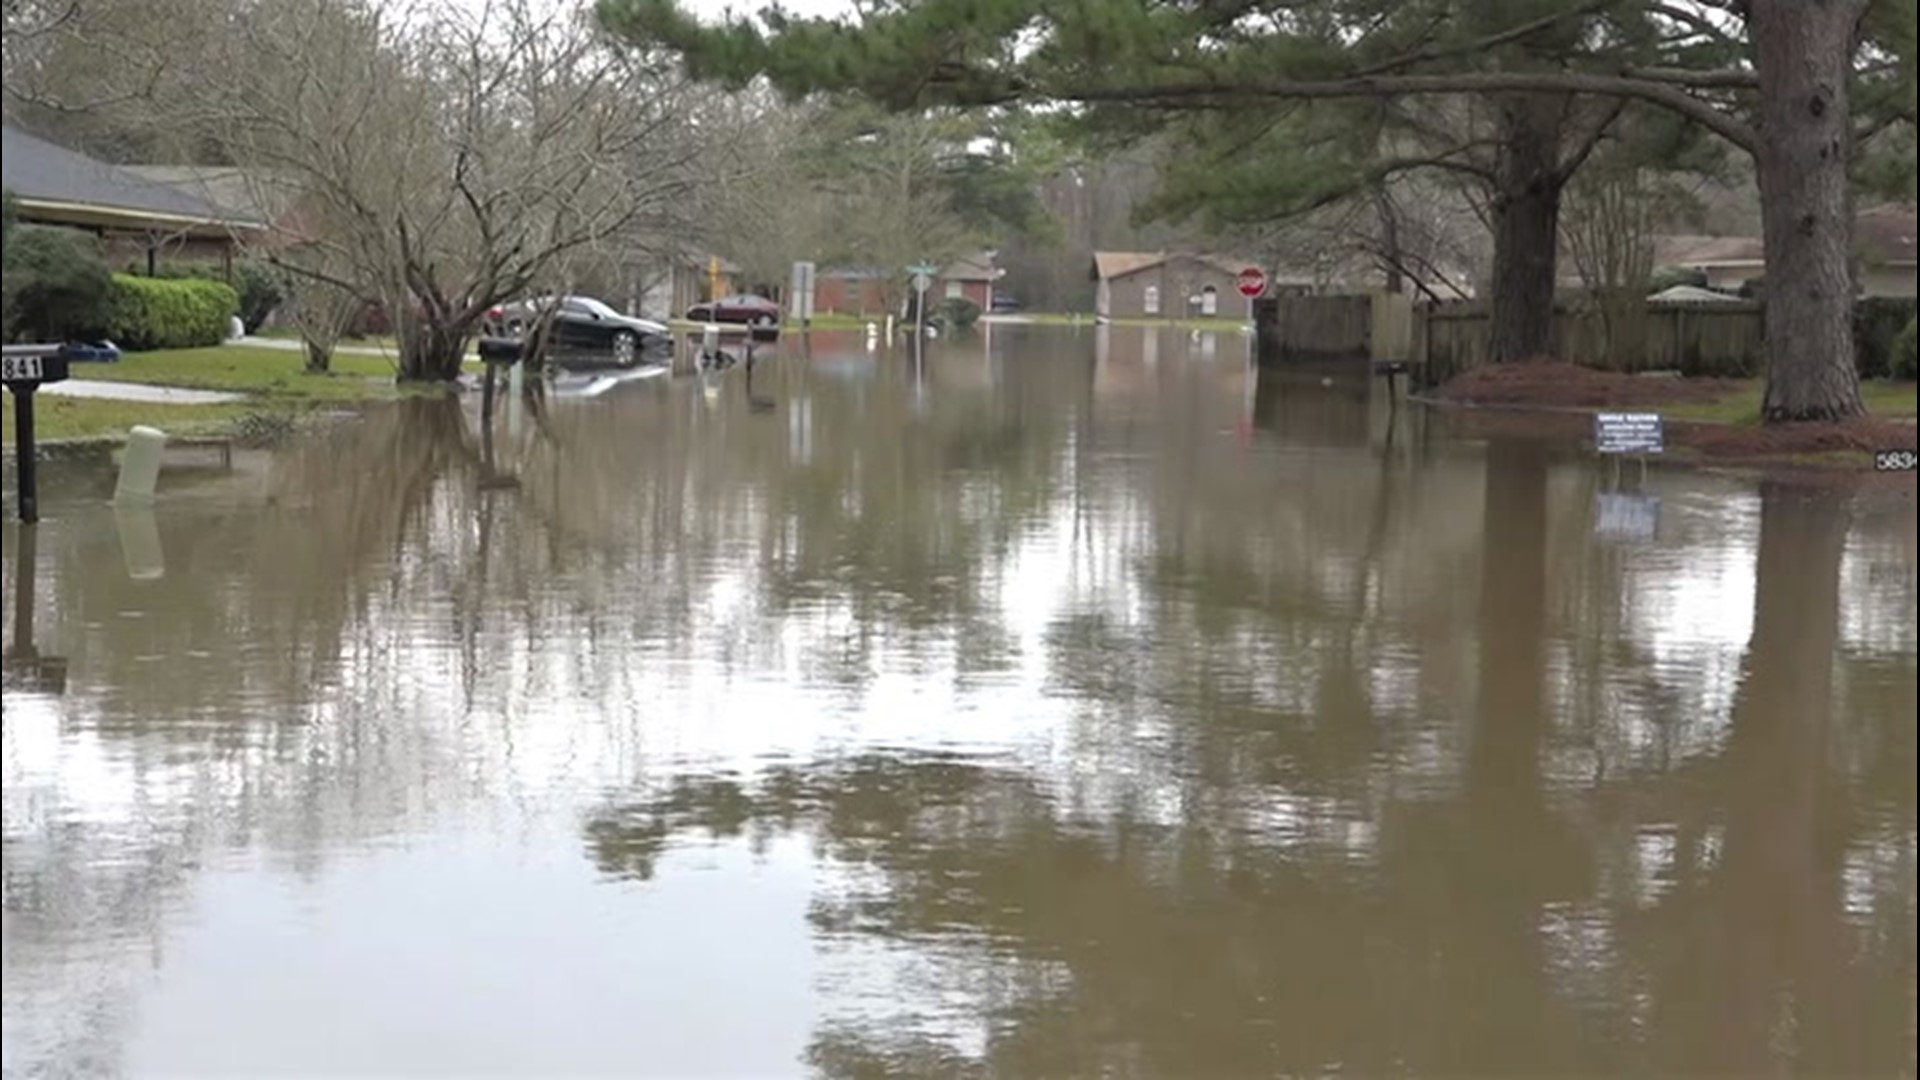 While the Pearl River is out of major flood stage in Jackson, Mississippi, as of Feb. 20, similar problems are headed downstream into Louisiana.